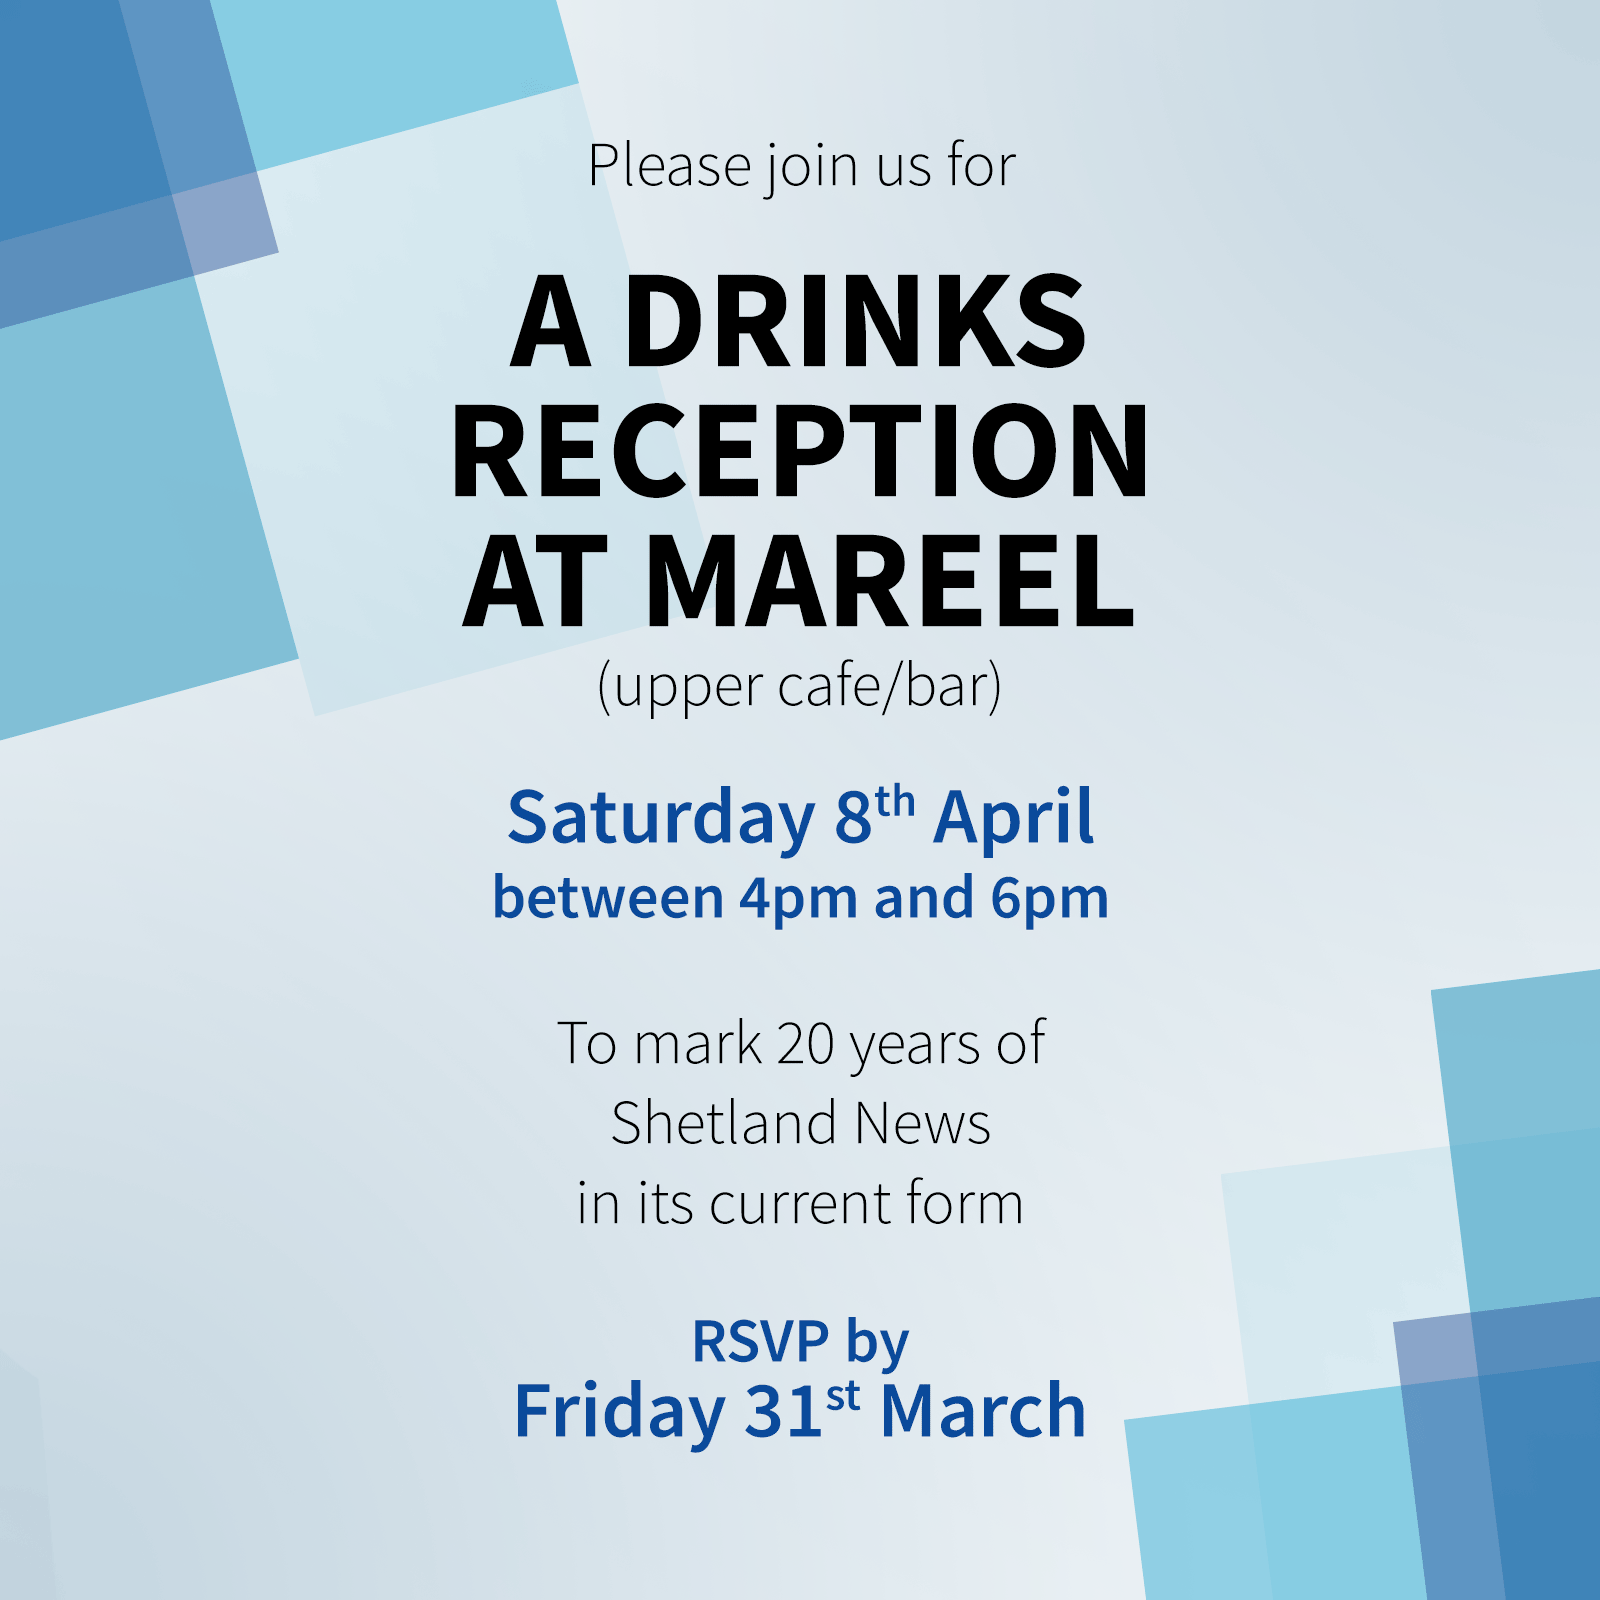 Please join us for a drinks reception at mareel. 8 April. Click here to RSVP by 31 March